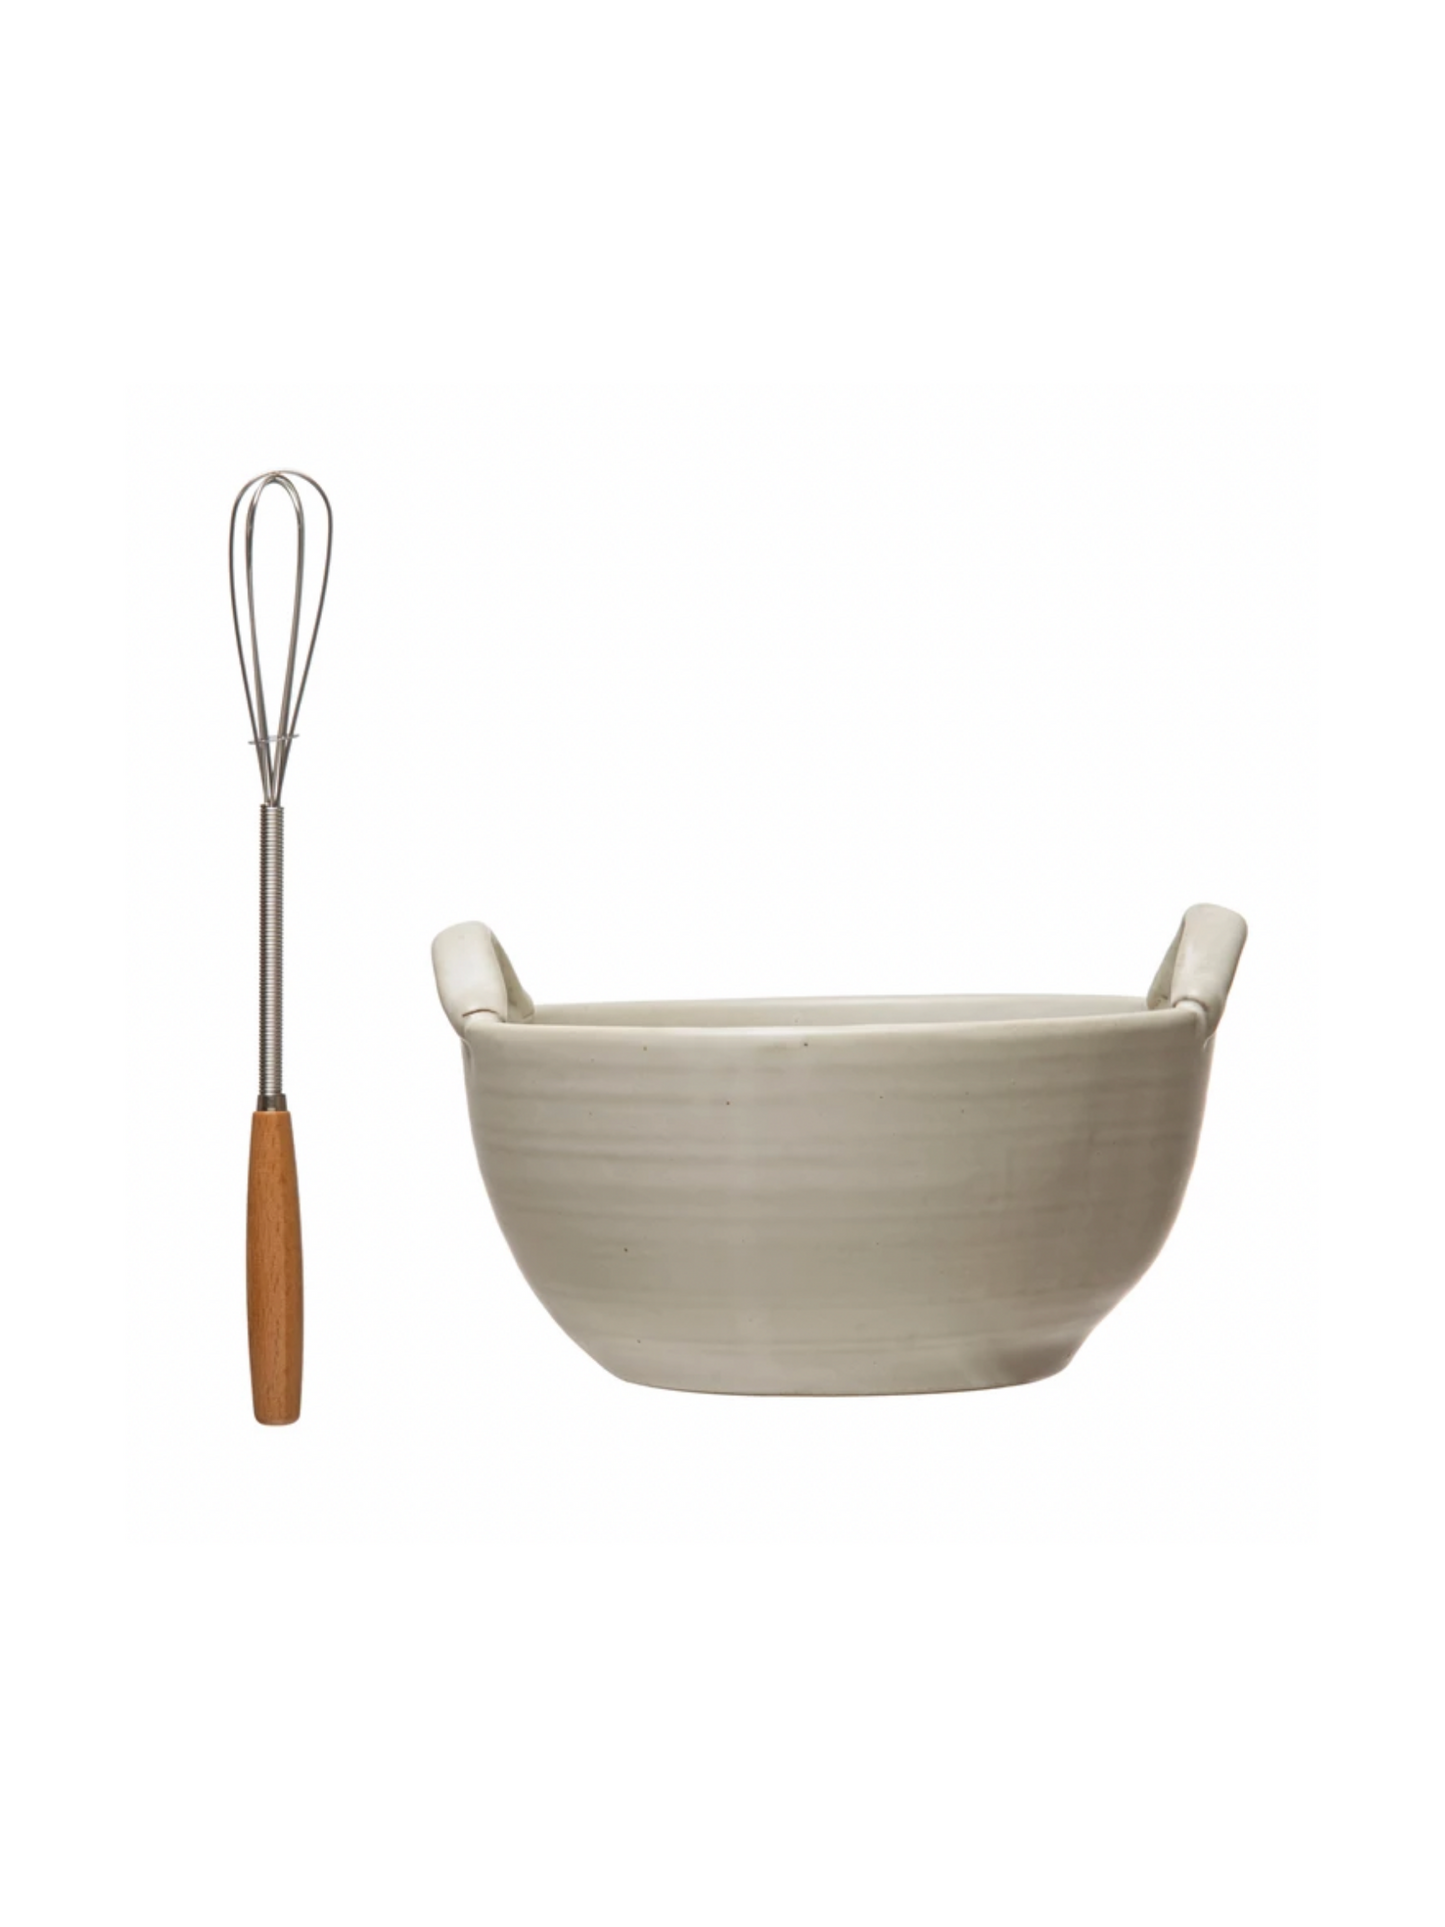 Bowl and Whisk